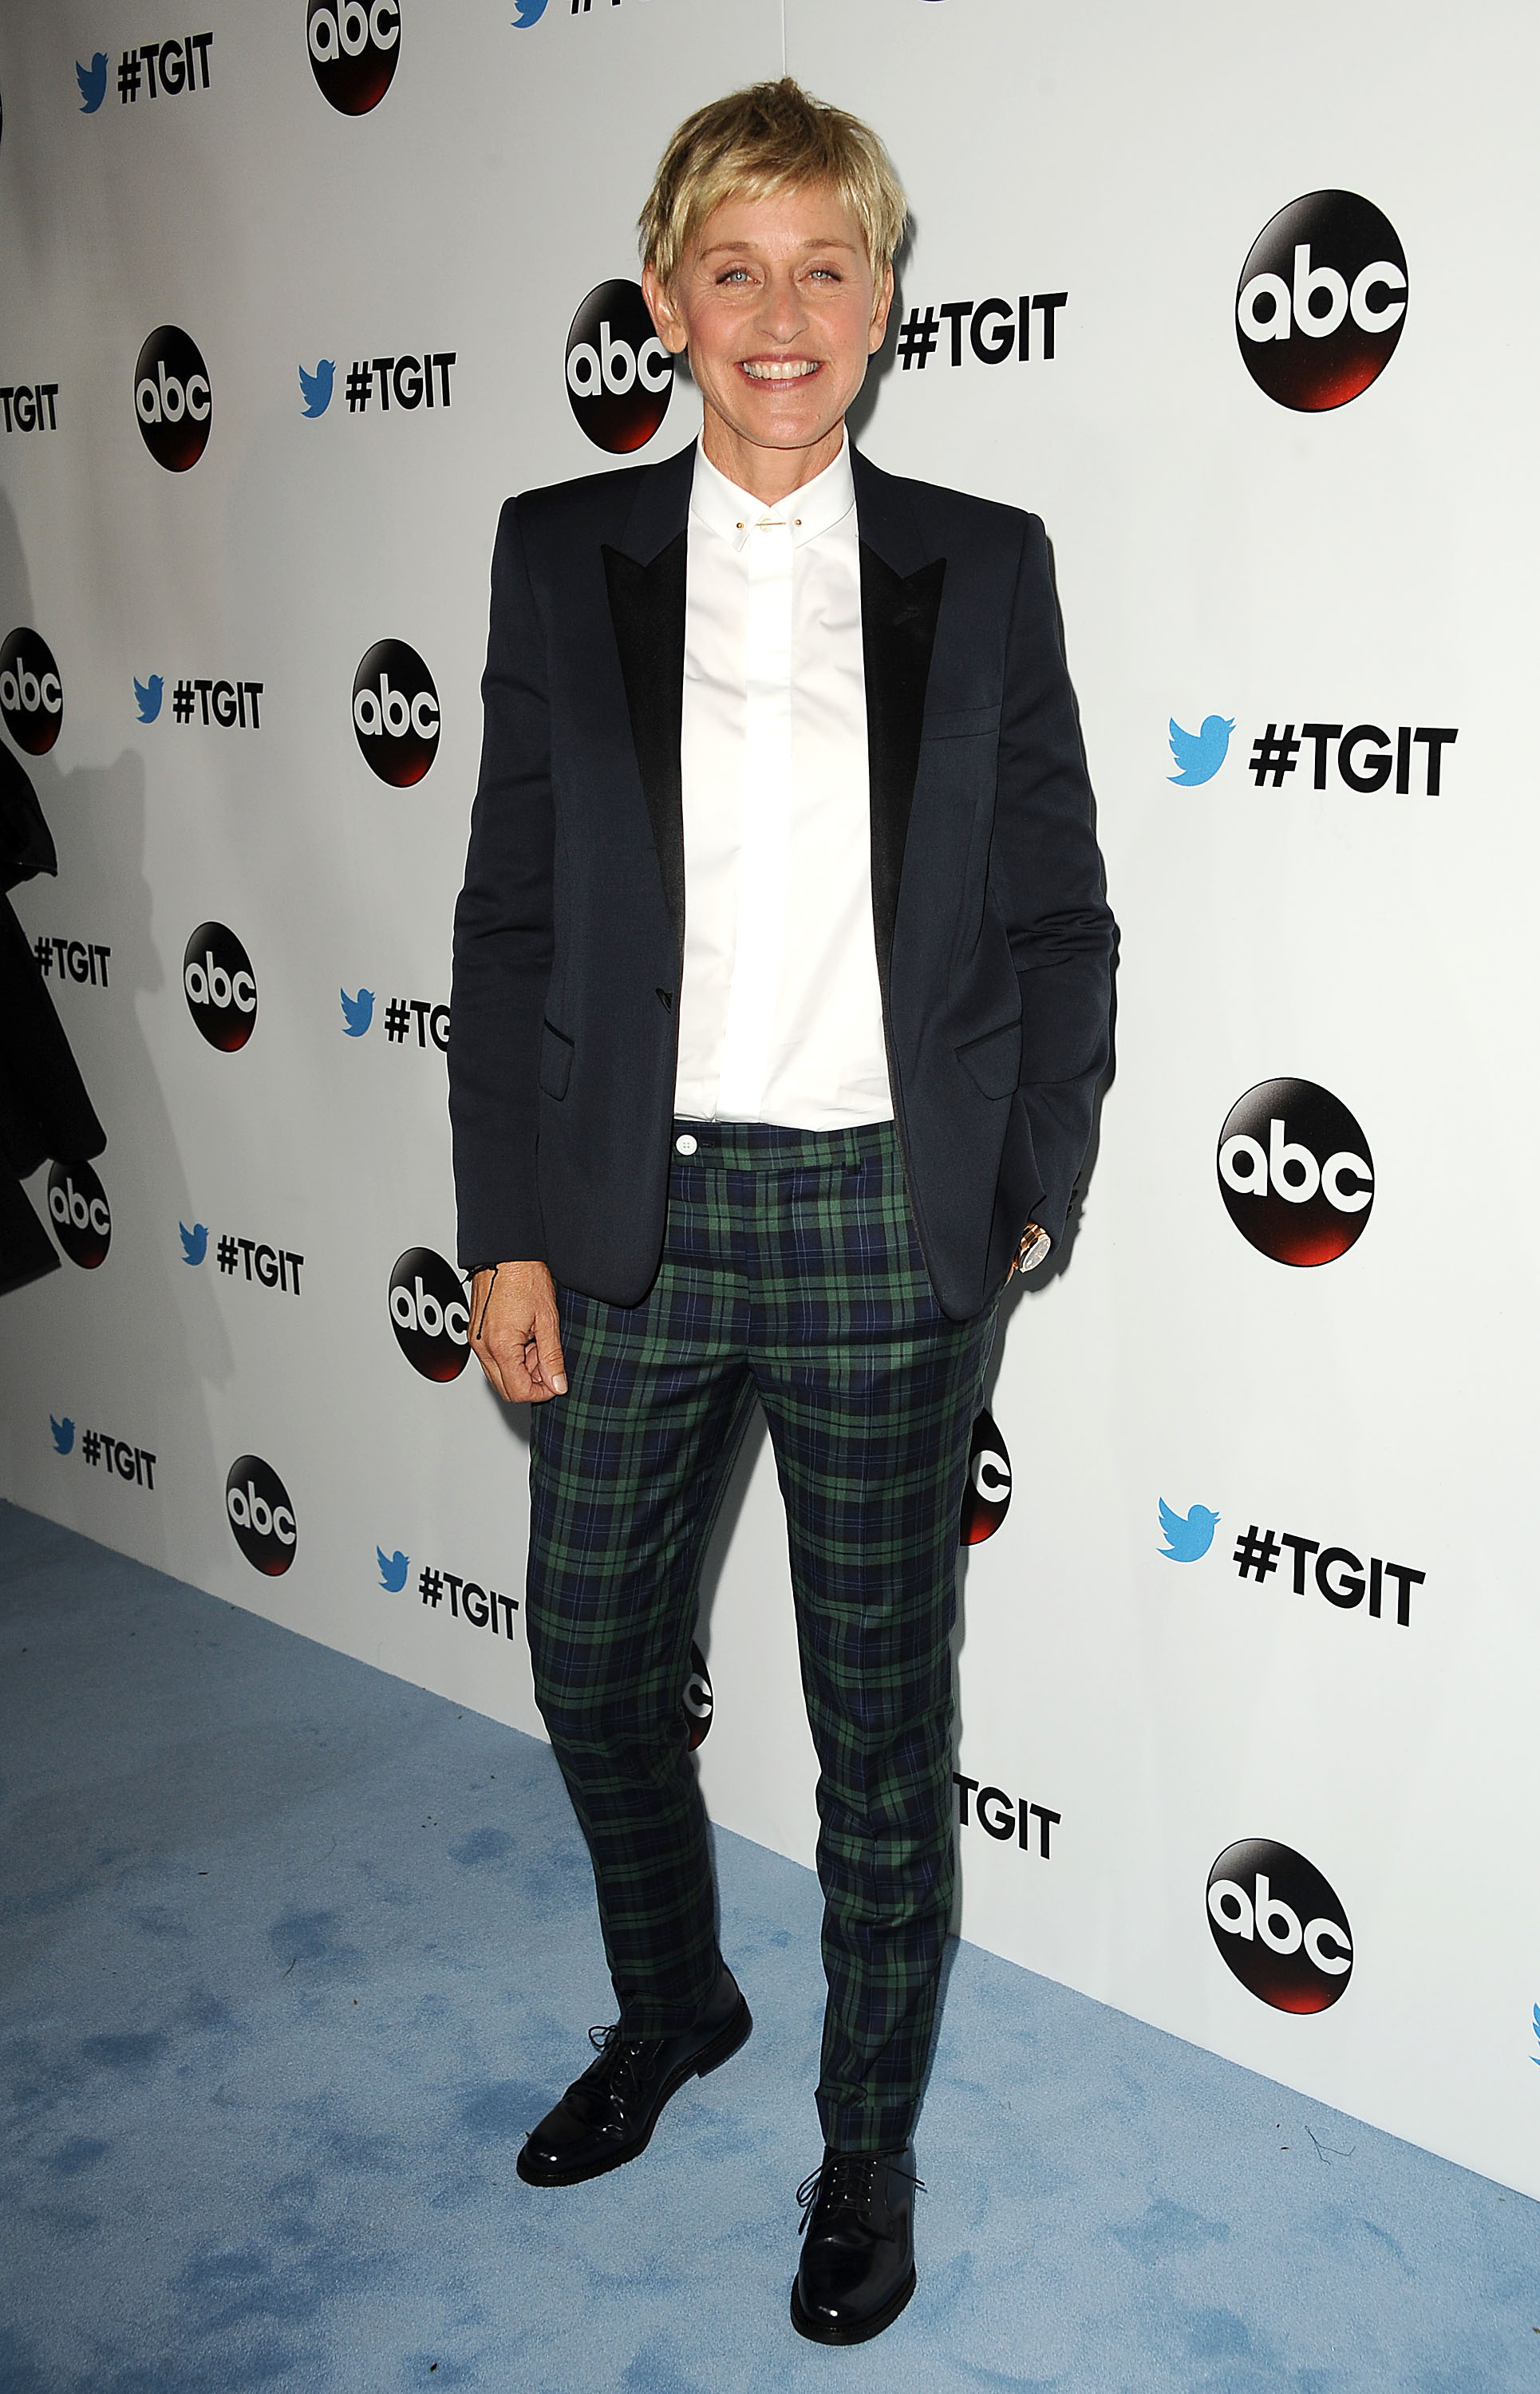 Ellen DeGeneres attends the #TGIT premiere event hosted by Twitter at Palihouse Holloway on September 20, 2014 in West Hollywood, California. (Jason LaVeris&mdash;FilmMagic)